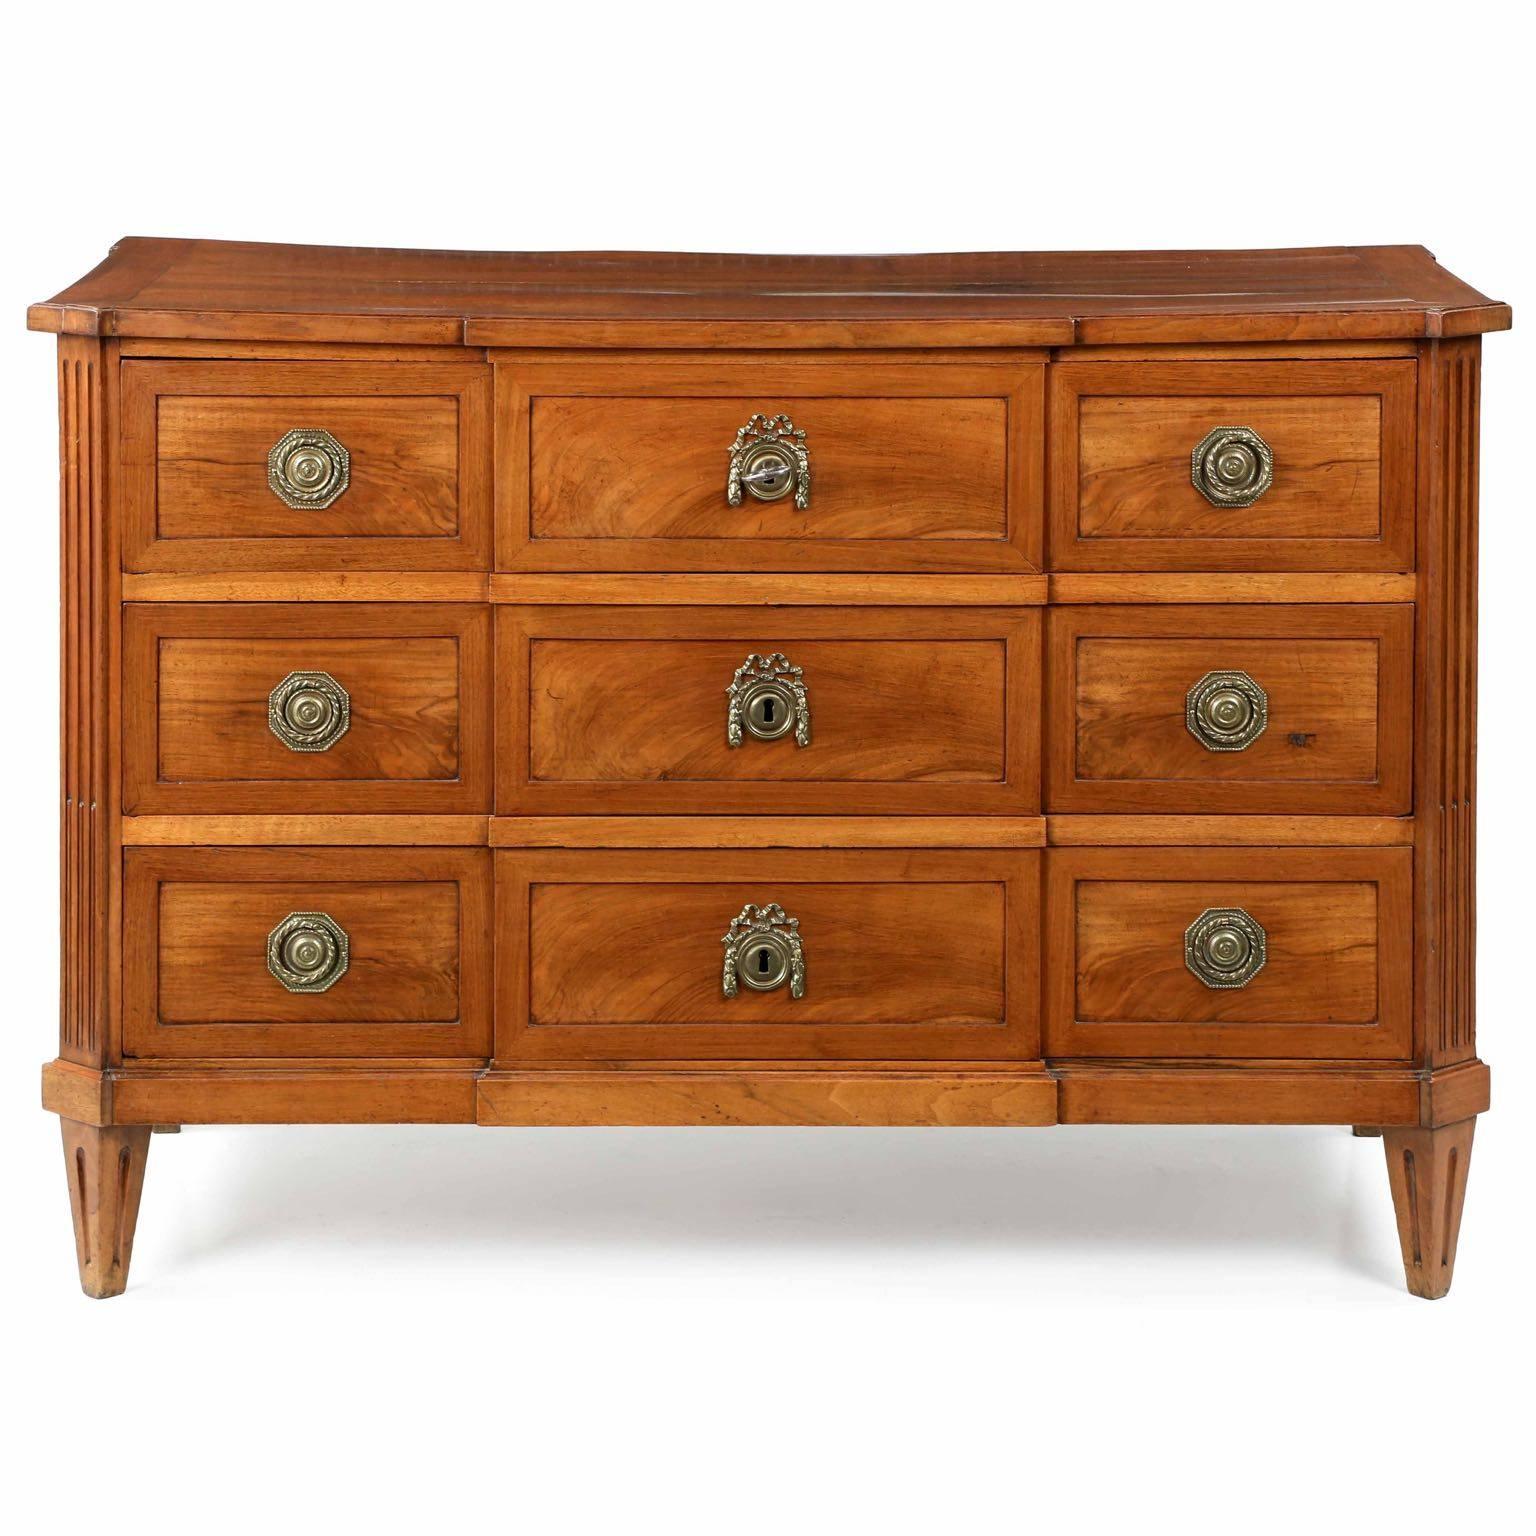 A warm and inviting piece that brings an angularity and simplicity to the interior, the mellowed patina of the golden surface is most attractive. Crafted during the last quarter of the 19th century in the manner of forms a century prior, the